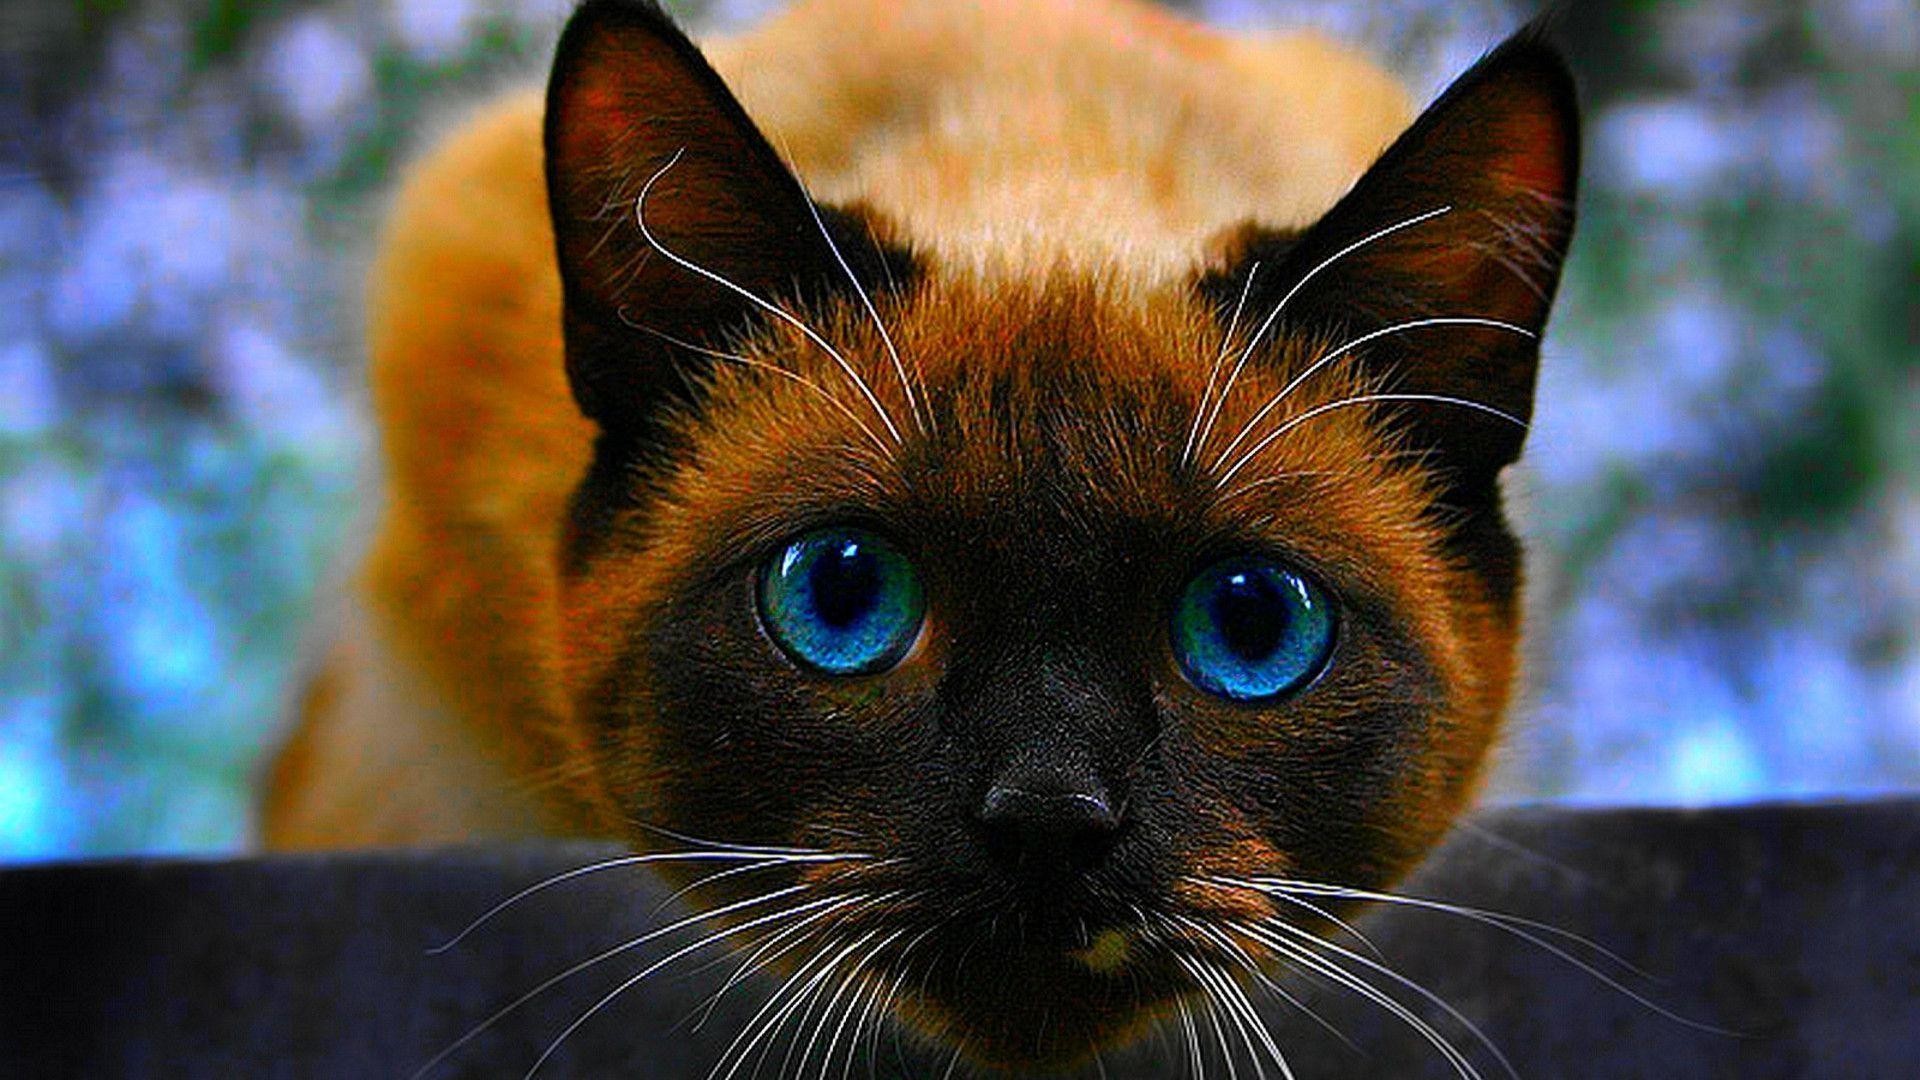 1920x1080 Siamese cat wallpapers - HD Wallpapers |High Definition| 100 .